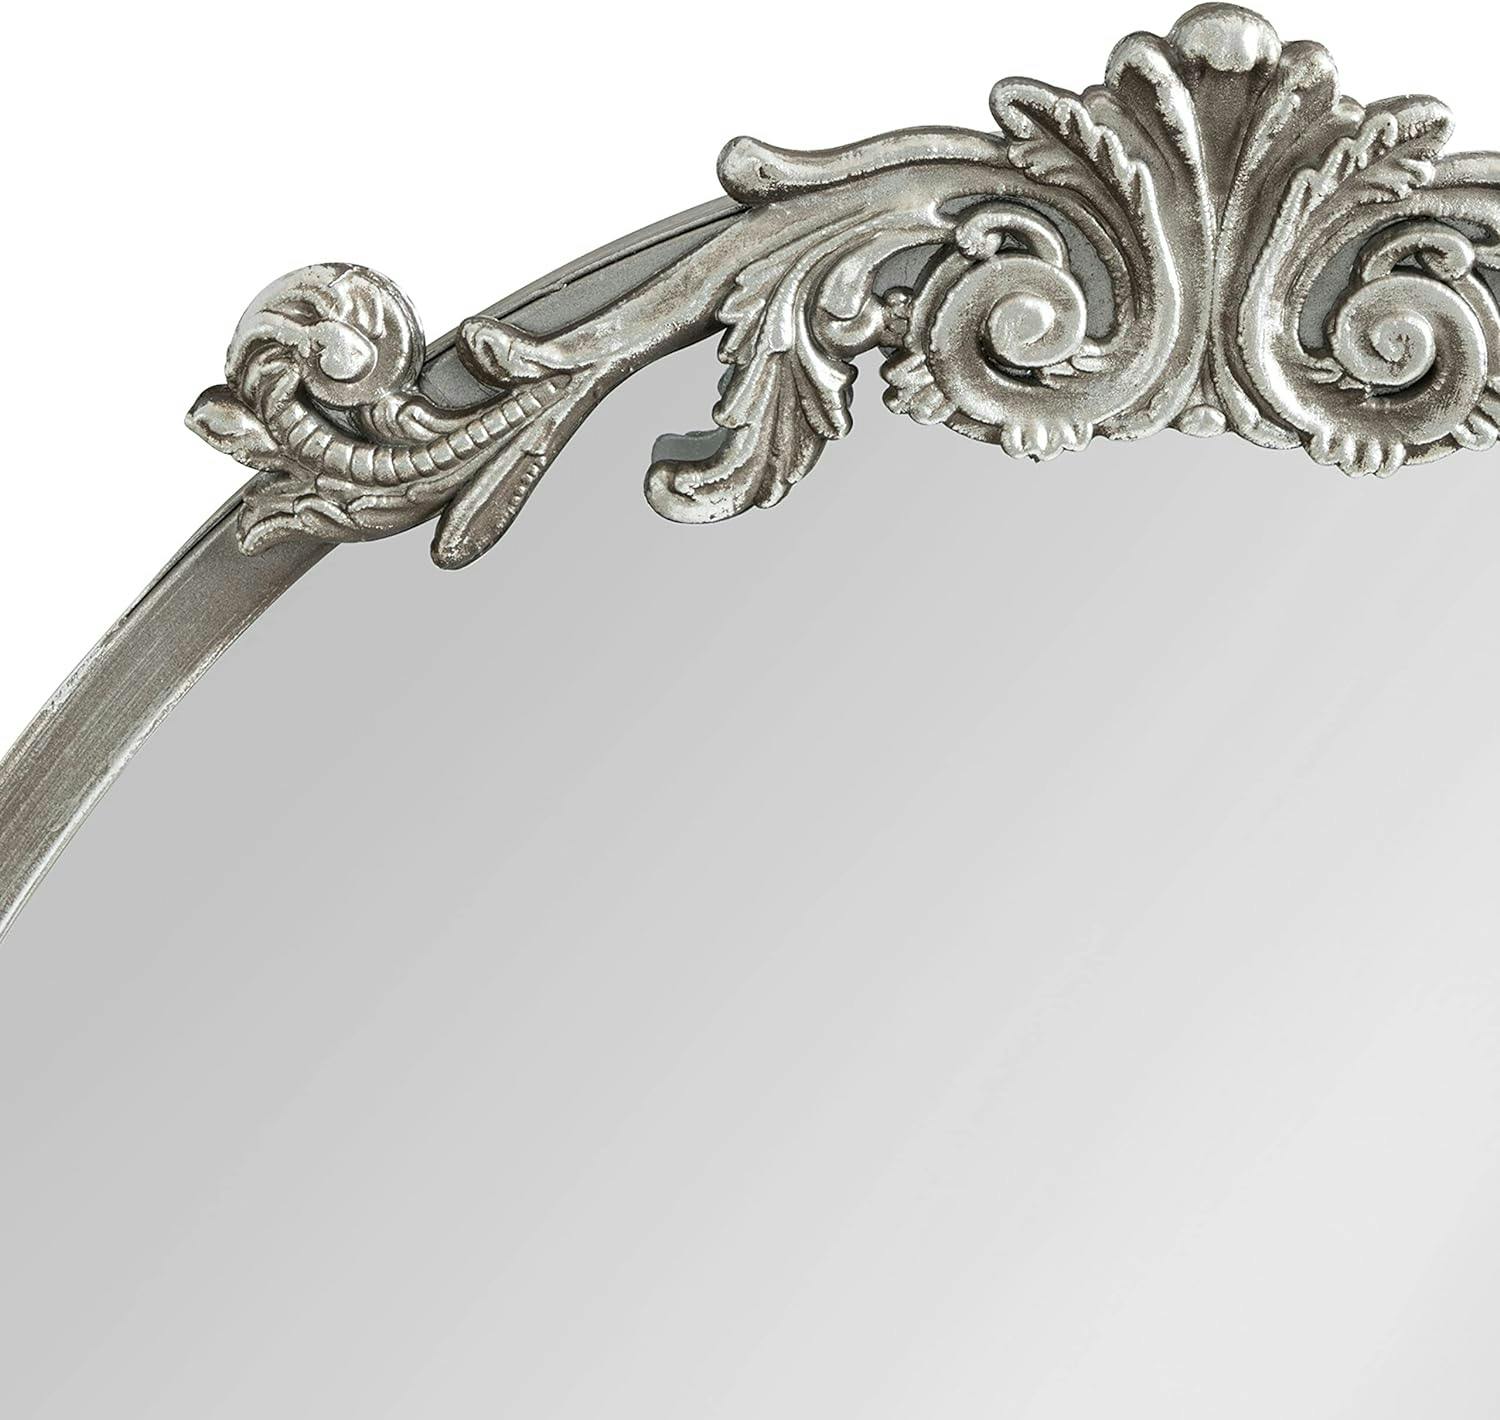 Arendahl Baroque-Inspired Ornate Silver Oval Wall Mirror